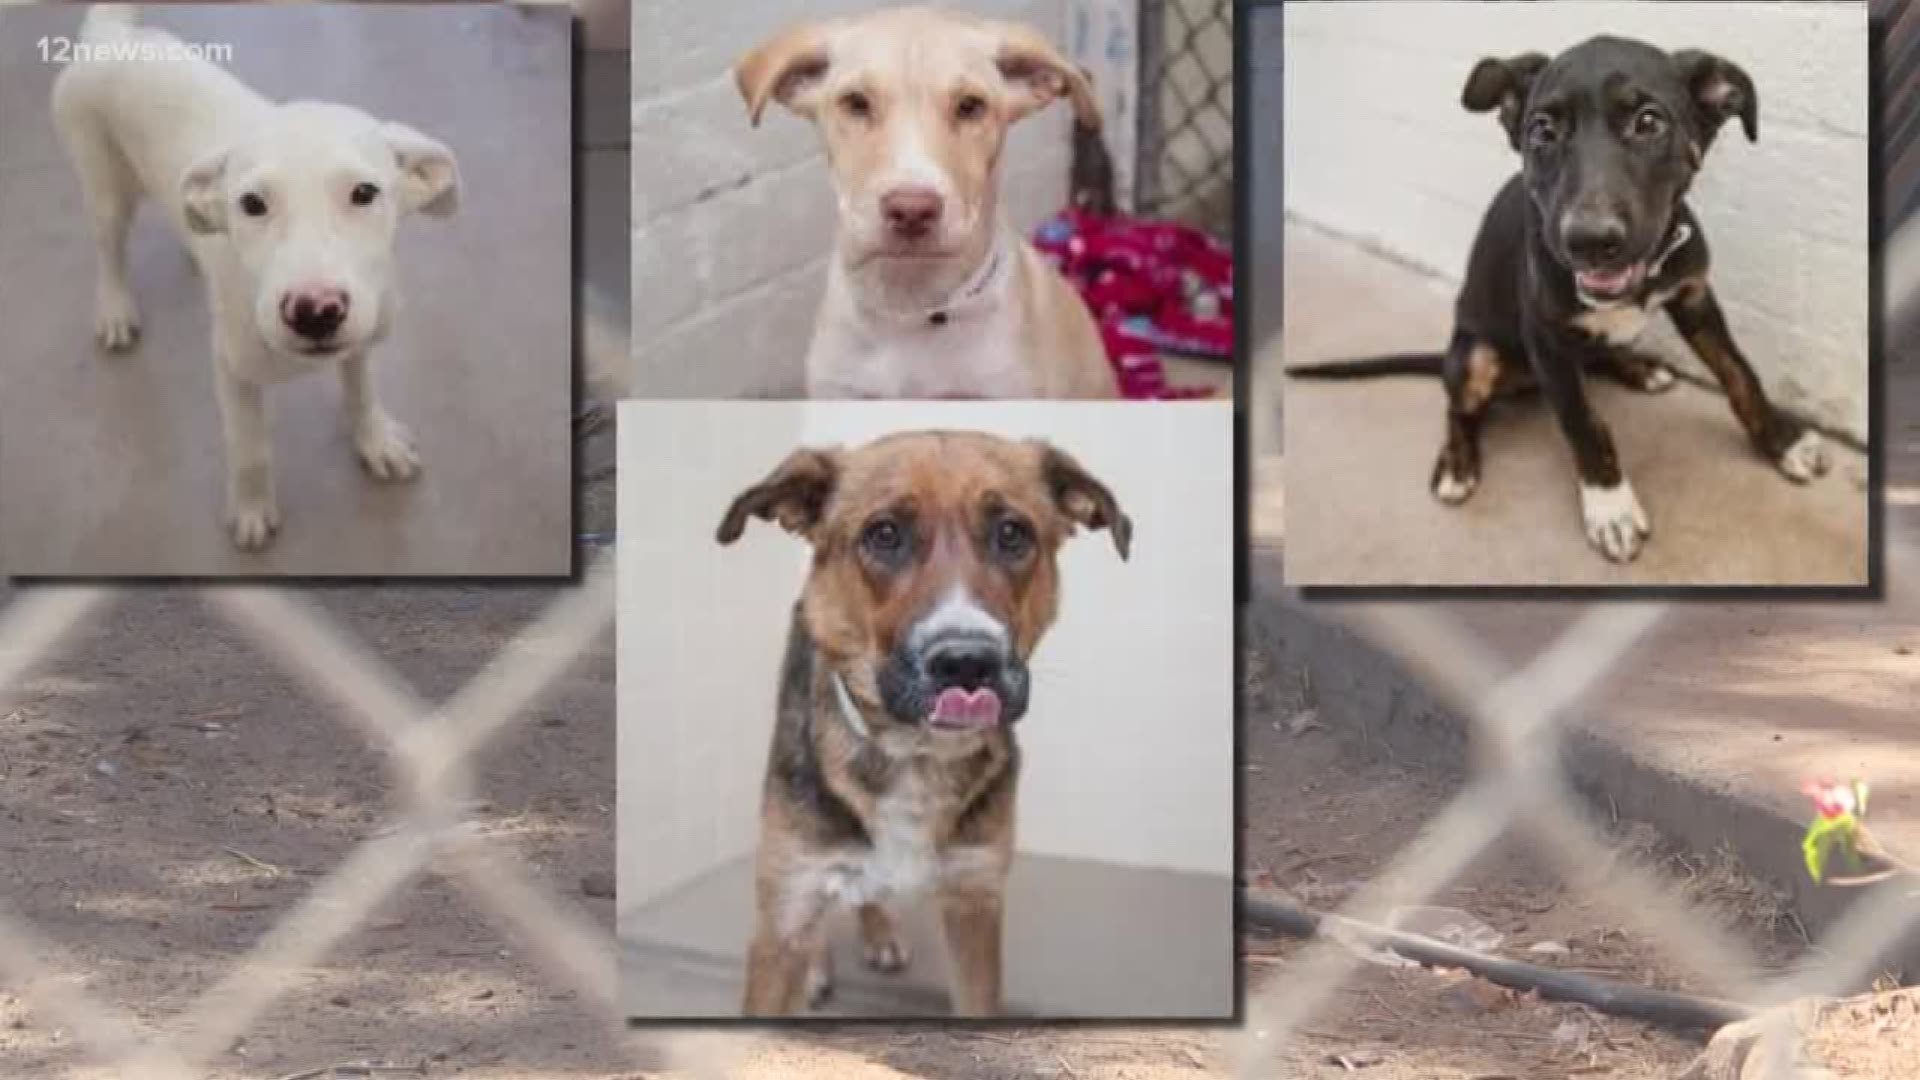 The dogs were taken into Arizona Humane Society custody after their owner, Ruby Marlow, was arrested Tuesday for animal abuse.